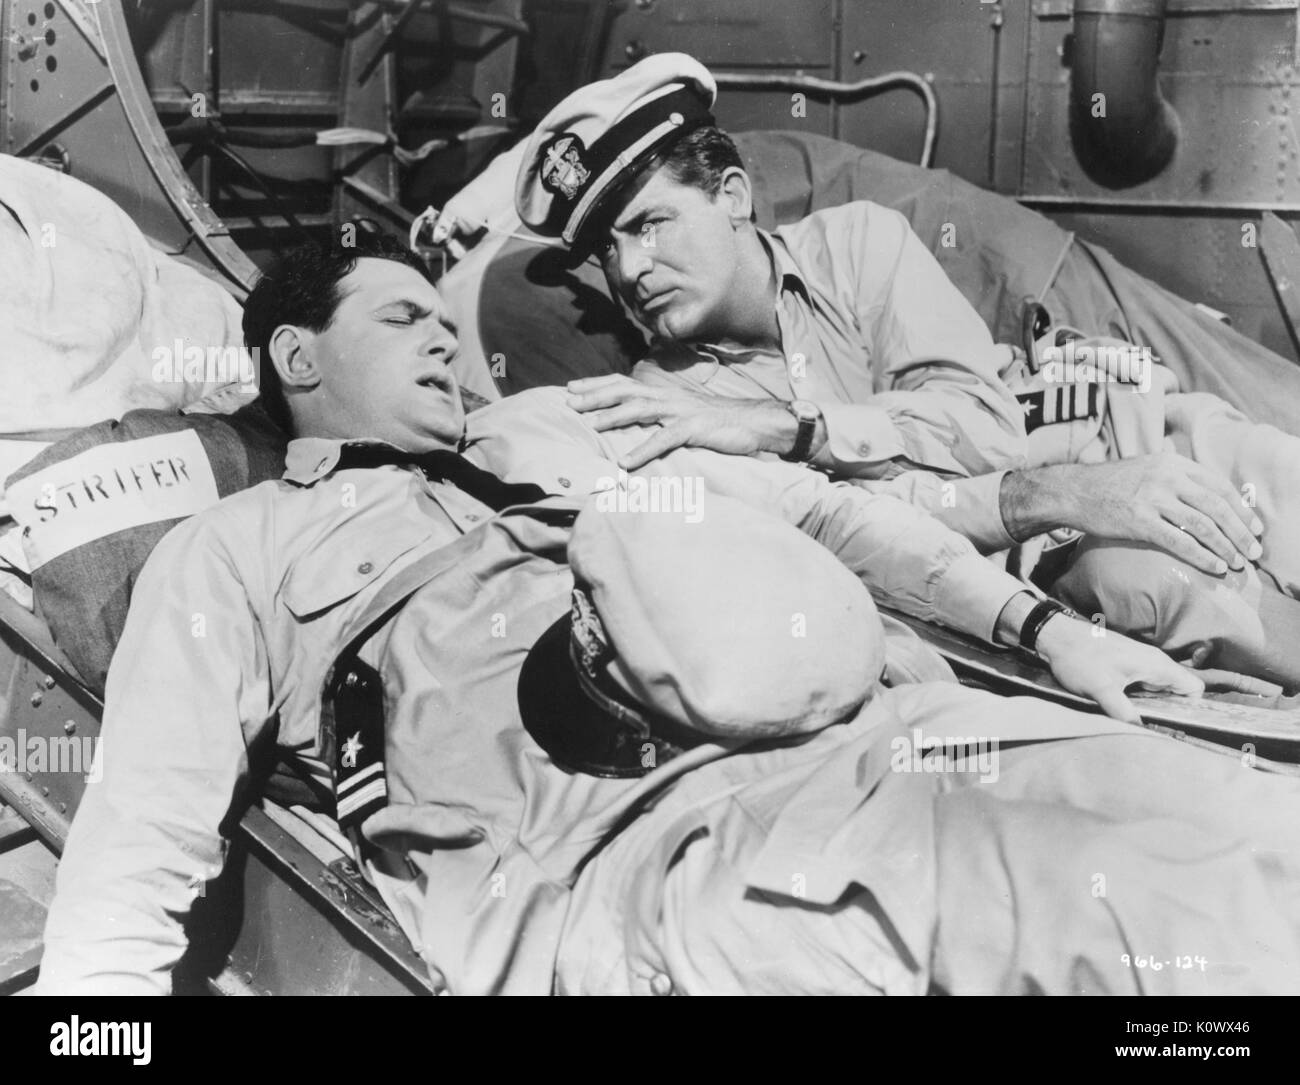 Two soldiers on stretchers, one appearing to be wounded, the second comforting him, wearing military uniforms, in a film still from an unidentified Hollywood war movie, Hollywood, California, 1953. Photo credit Smith Collection/Gado/Getty Images. Stock Photo